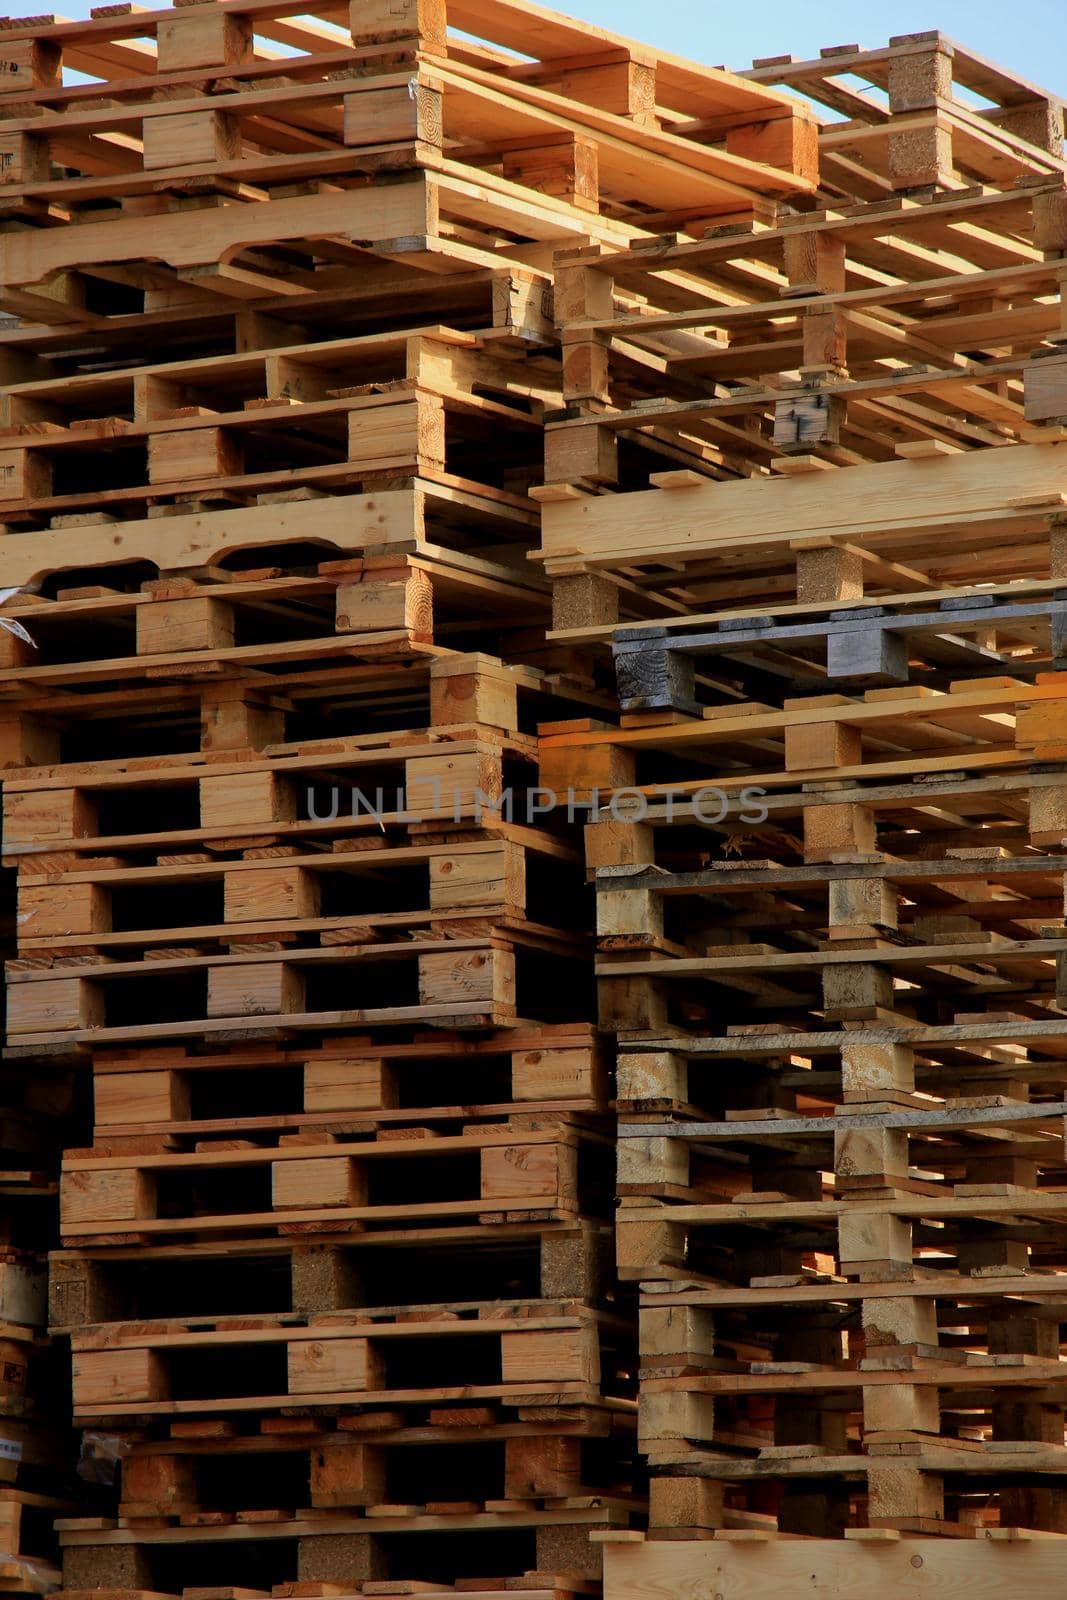 Stacked wooden pallets at a pallet storage by studioportosabbia